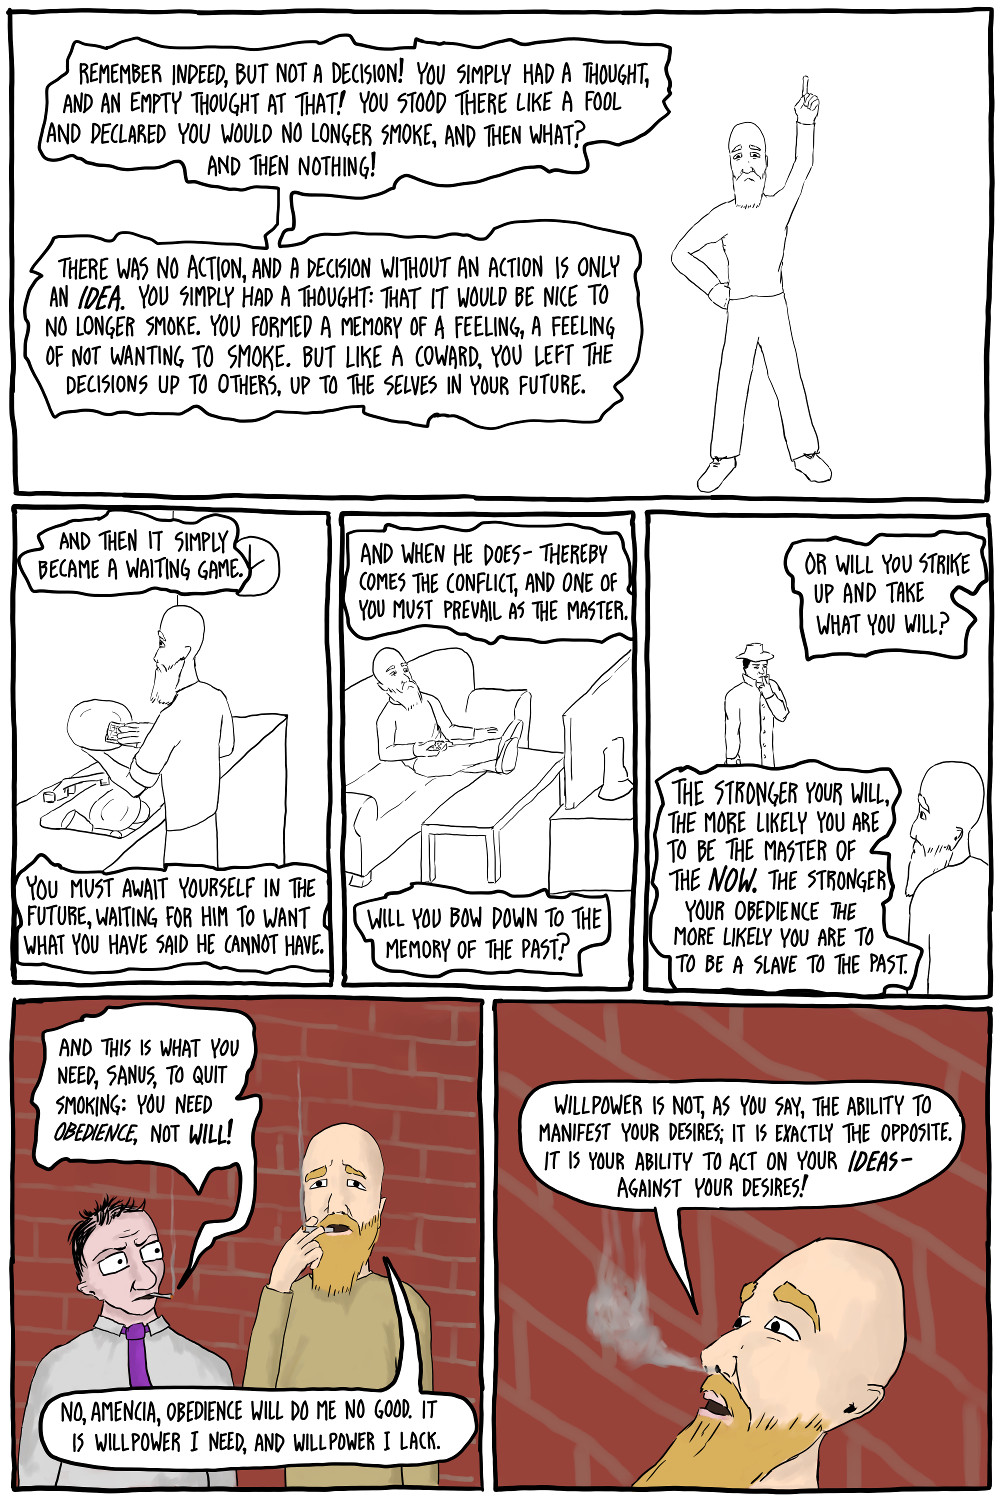 How to Quit Smoking - Existential Comics